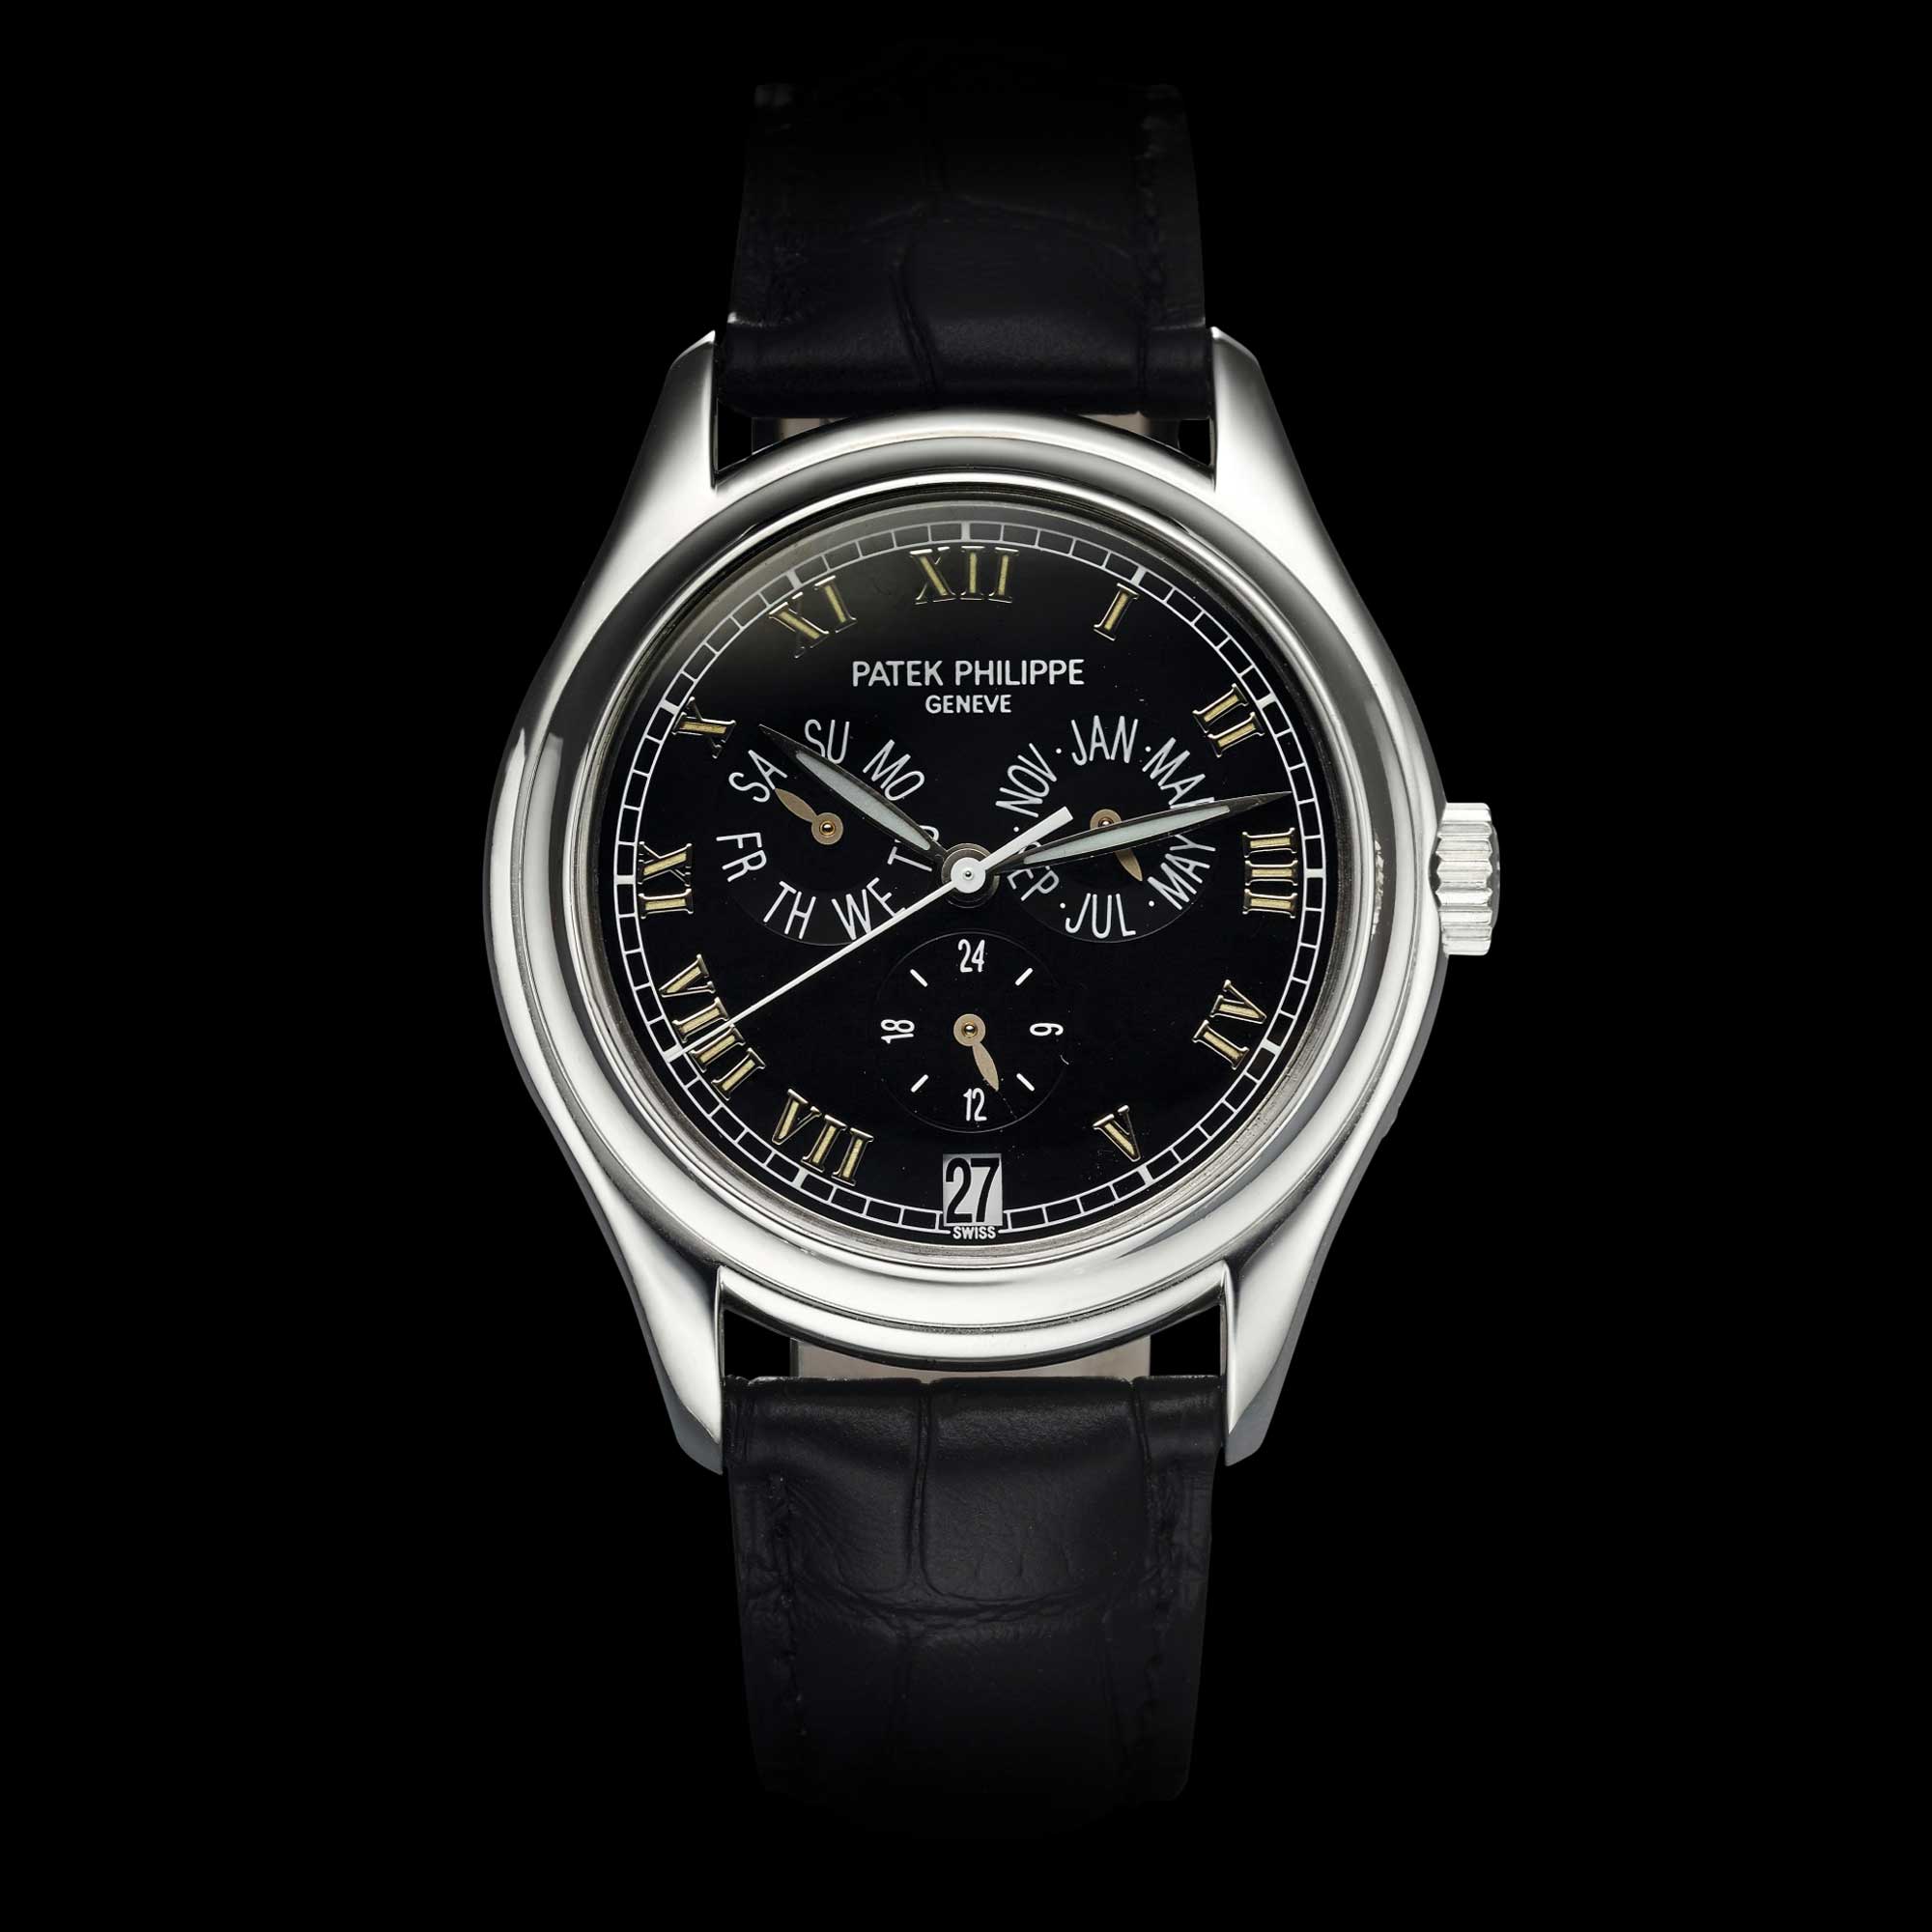 The first Patek Philippe Annual Calendar watch, Ref. 5035 from 1996, was an instant hit with a sub-20,000-dollar price tag